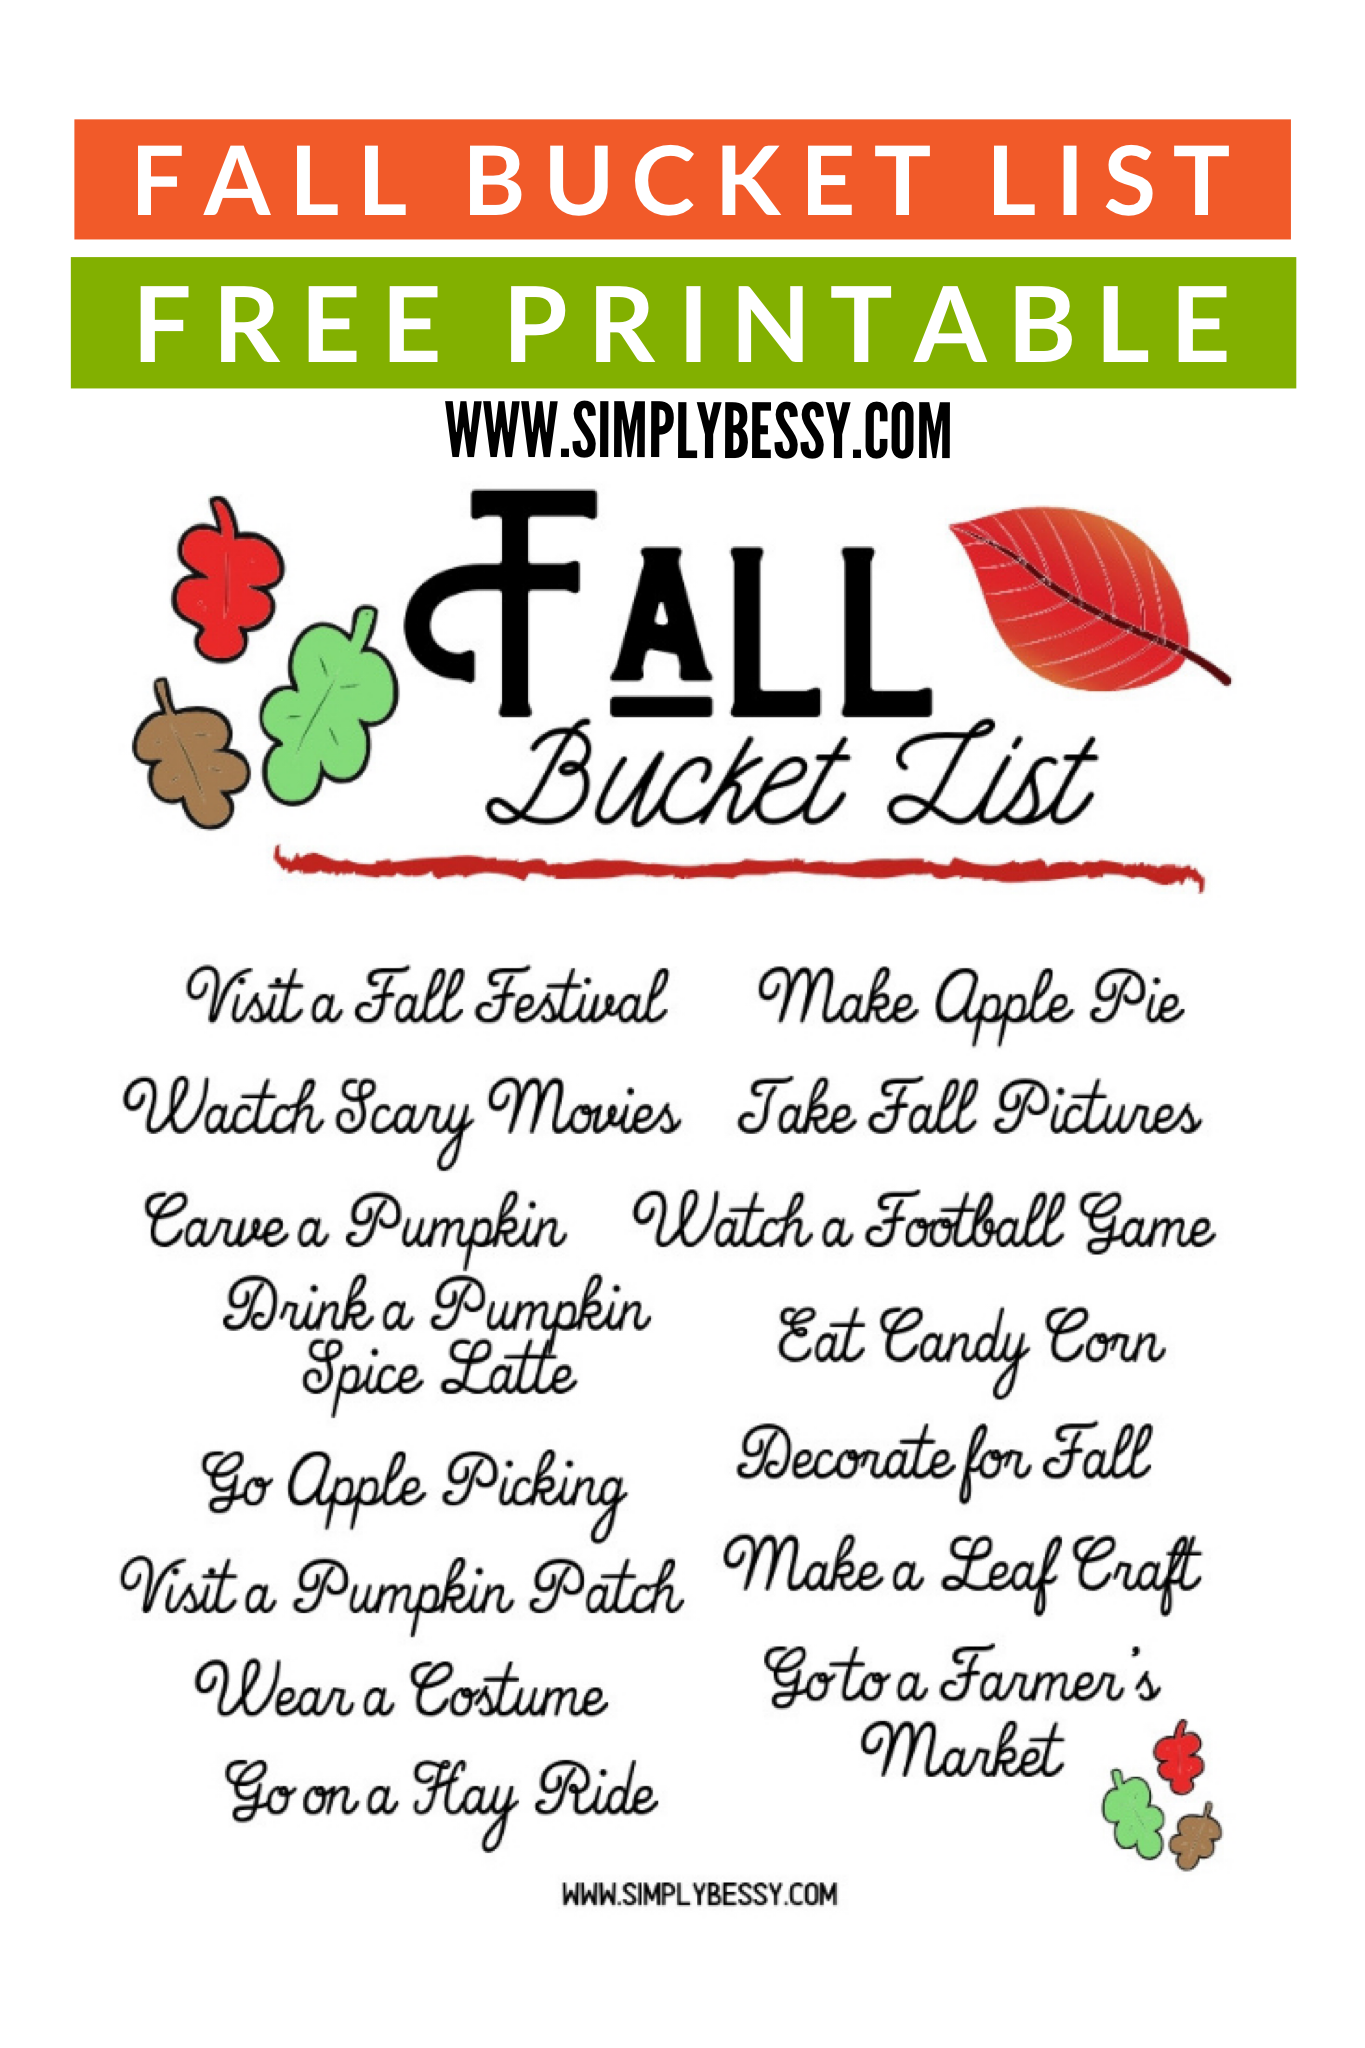 free-printable-fall-bucket-list-for-the-whole-family-made-with-happy